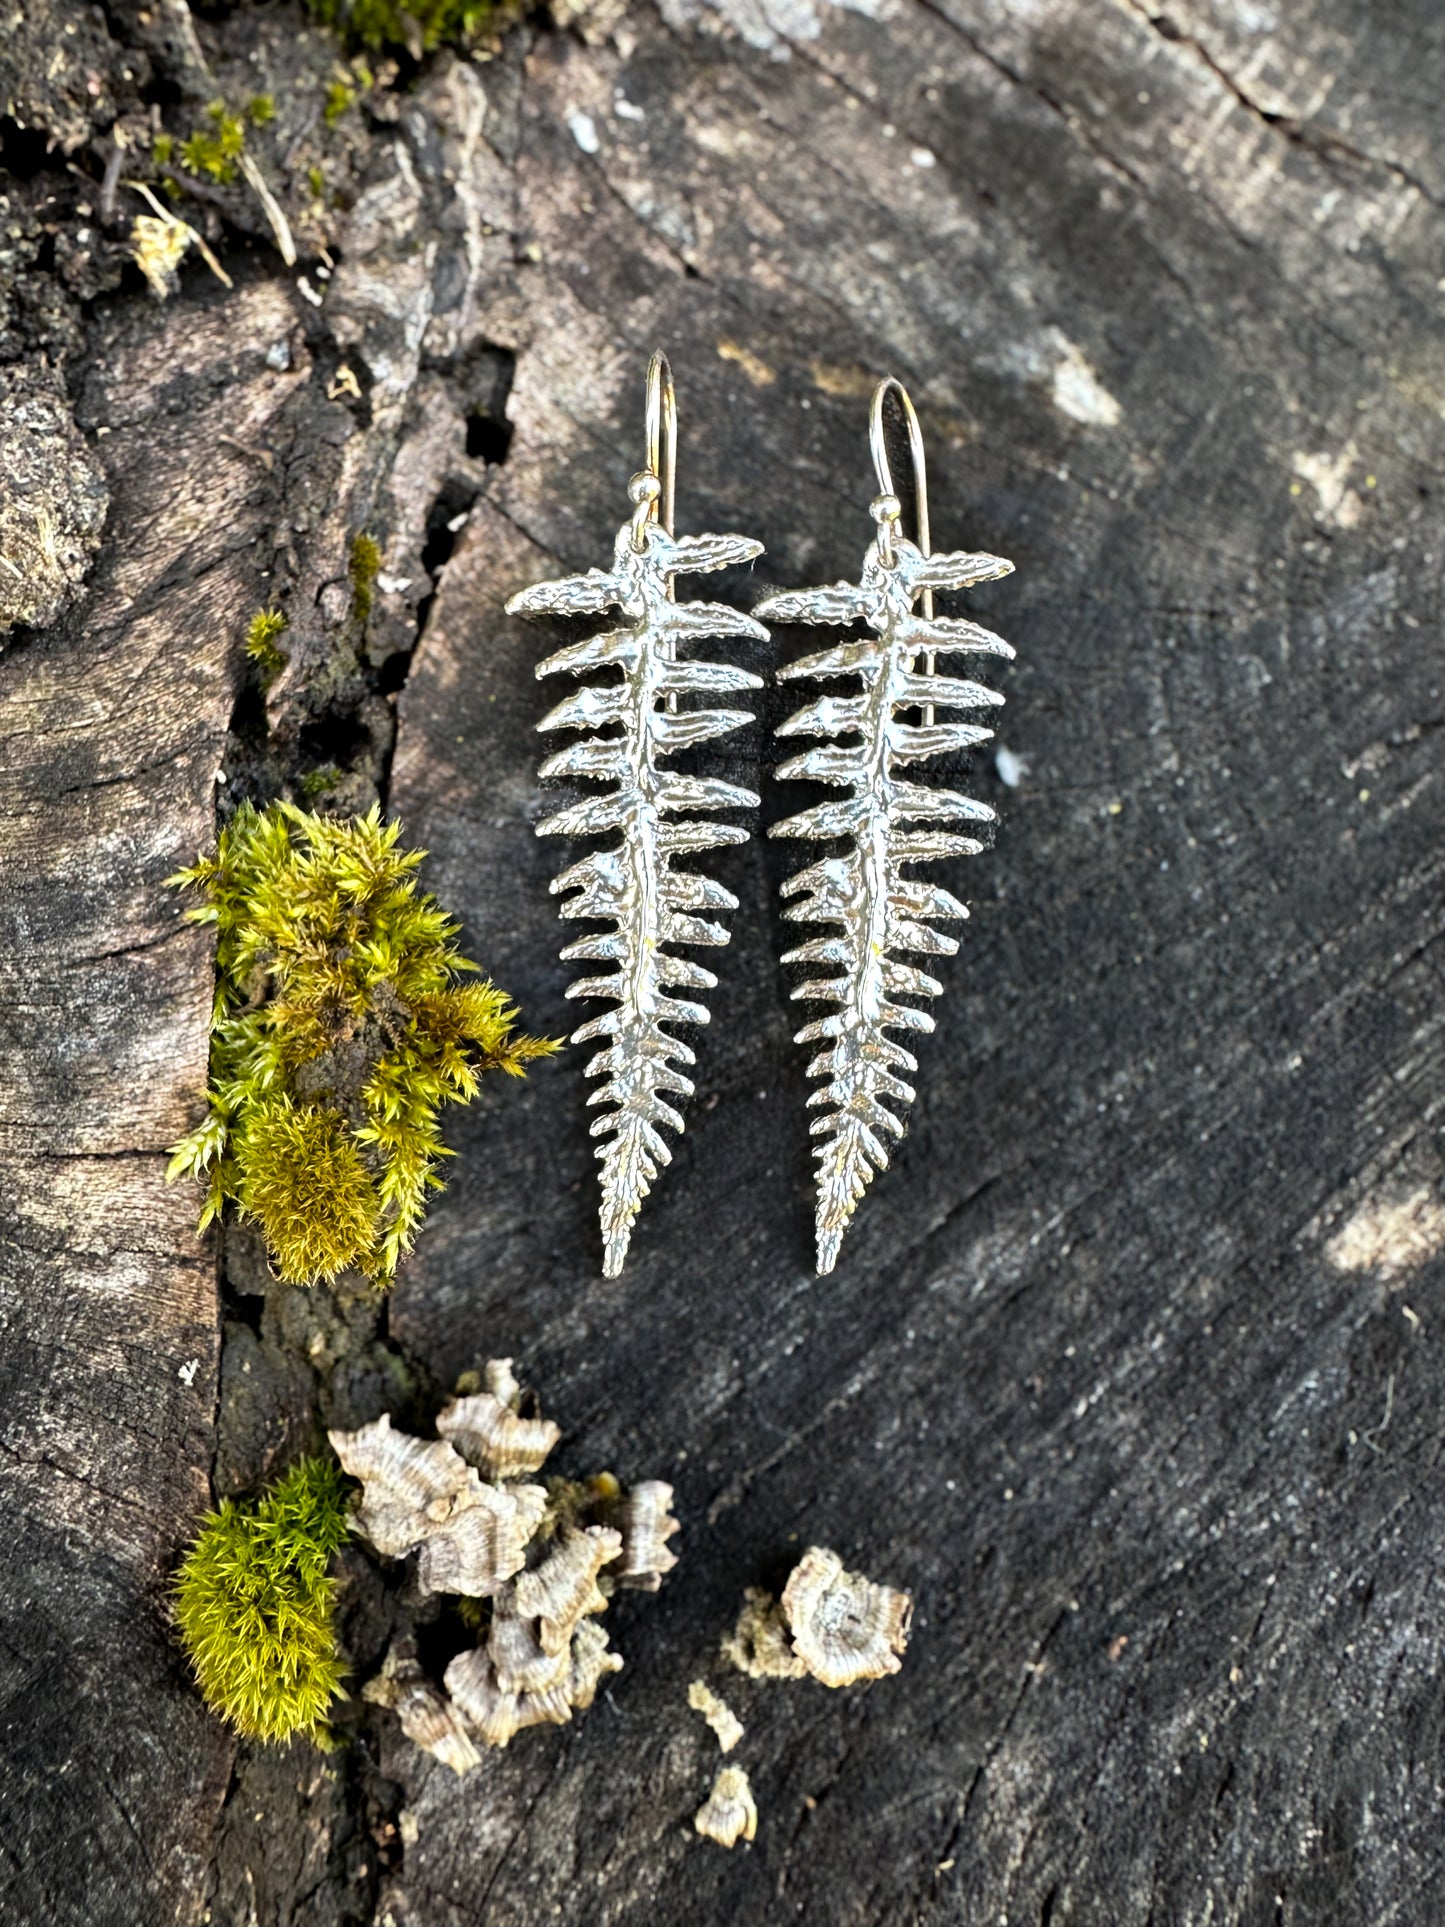 FERN | Handcrafted Fern Earrings | Recycled Sterling Silver | Made in Maine | Free Shipping